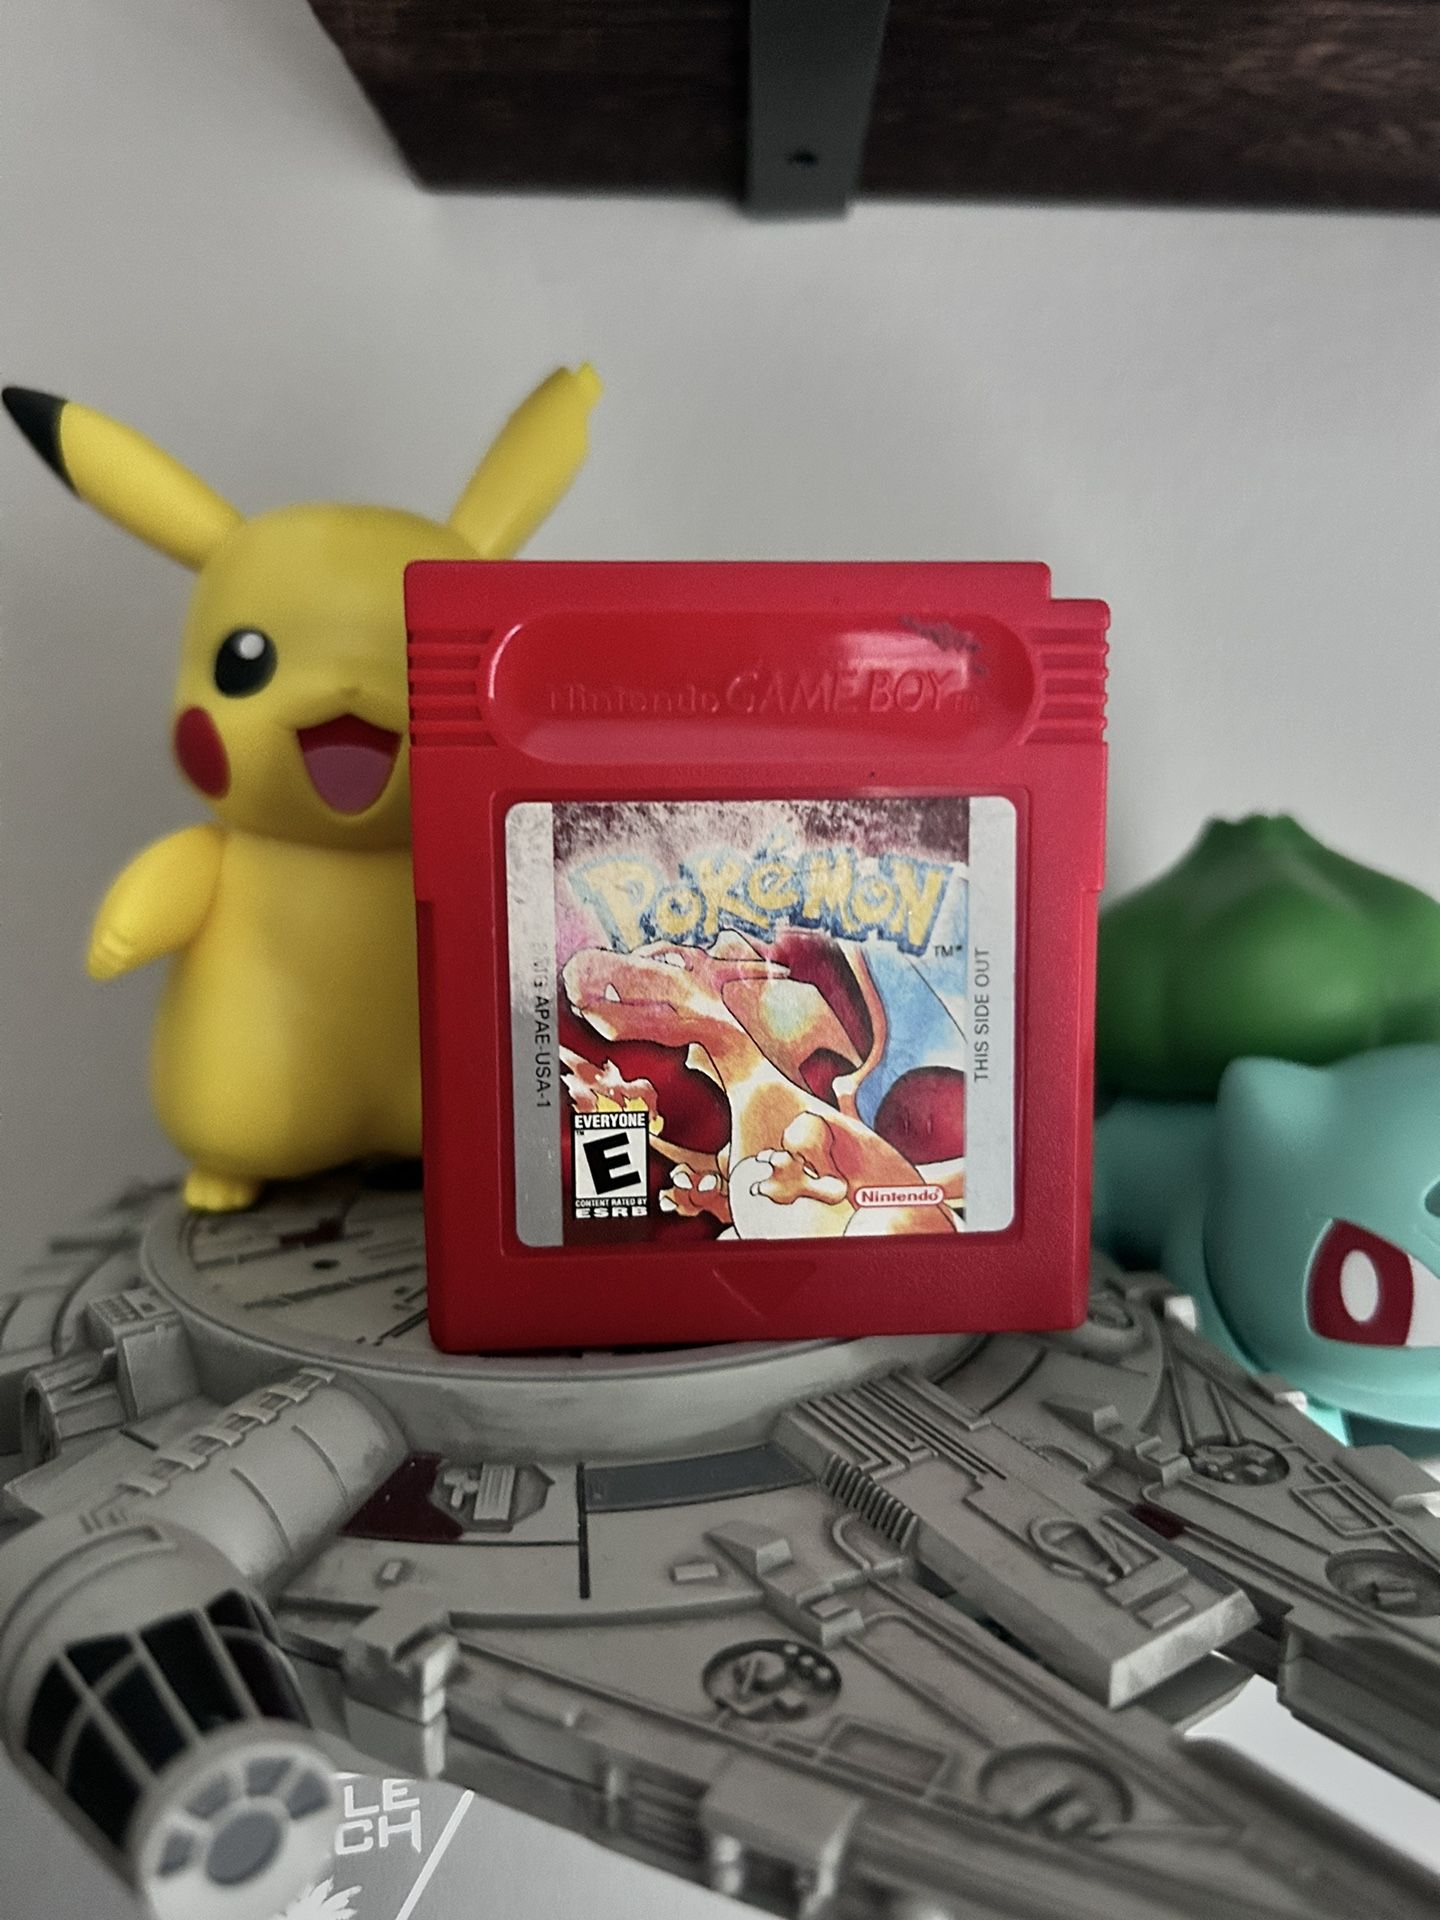 Pokemon Red | Gameboy | Gameboy Color | Gameboy Advance. This game can be played on all 3 game systems.